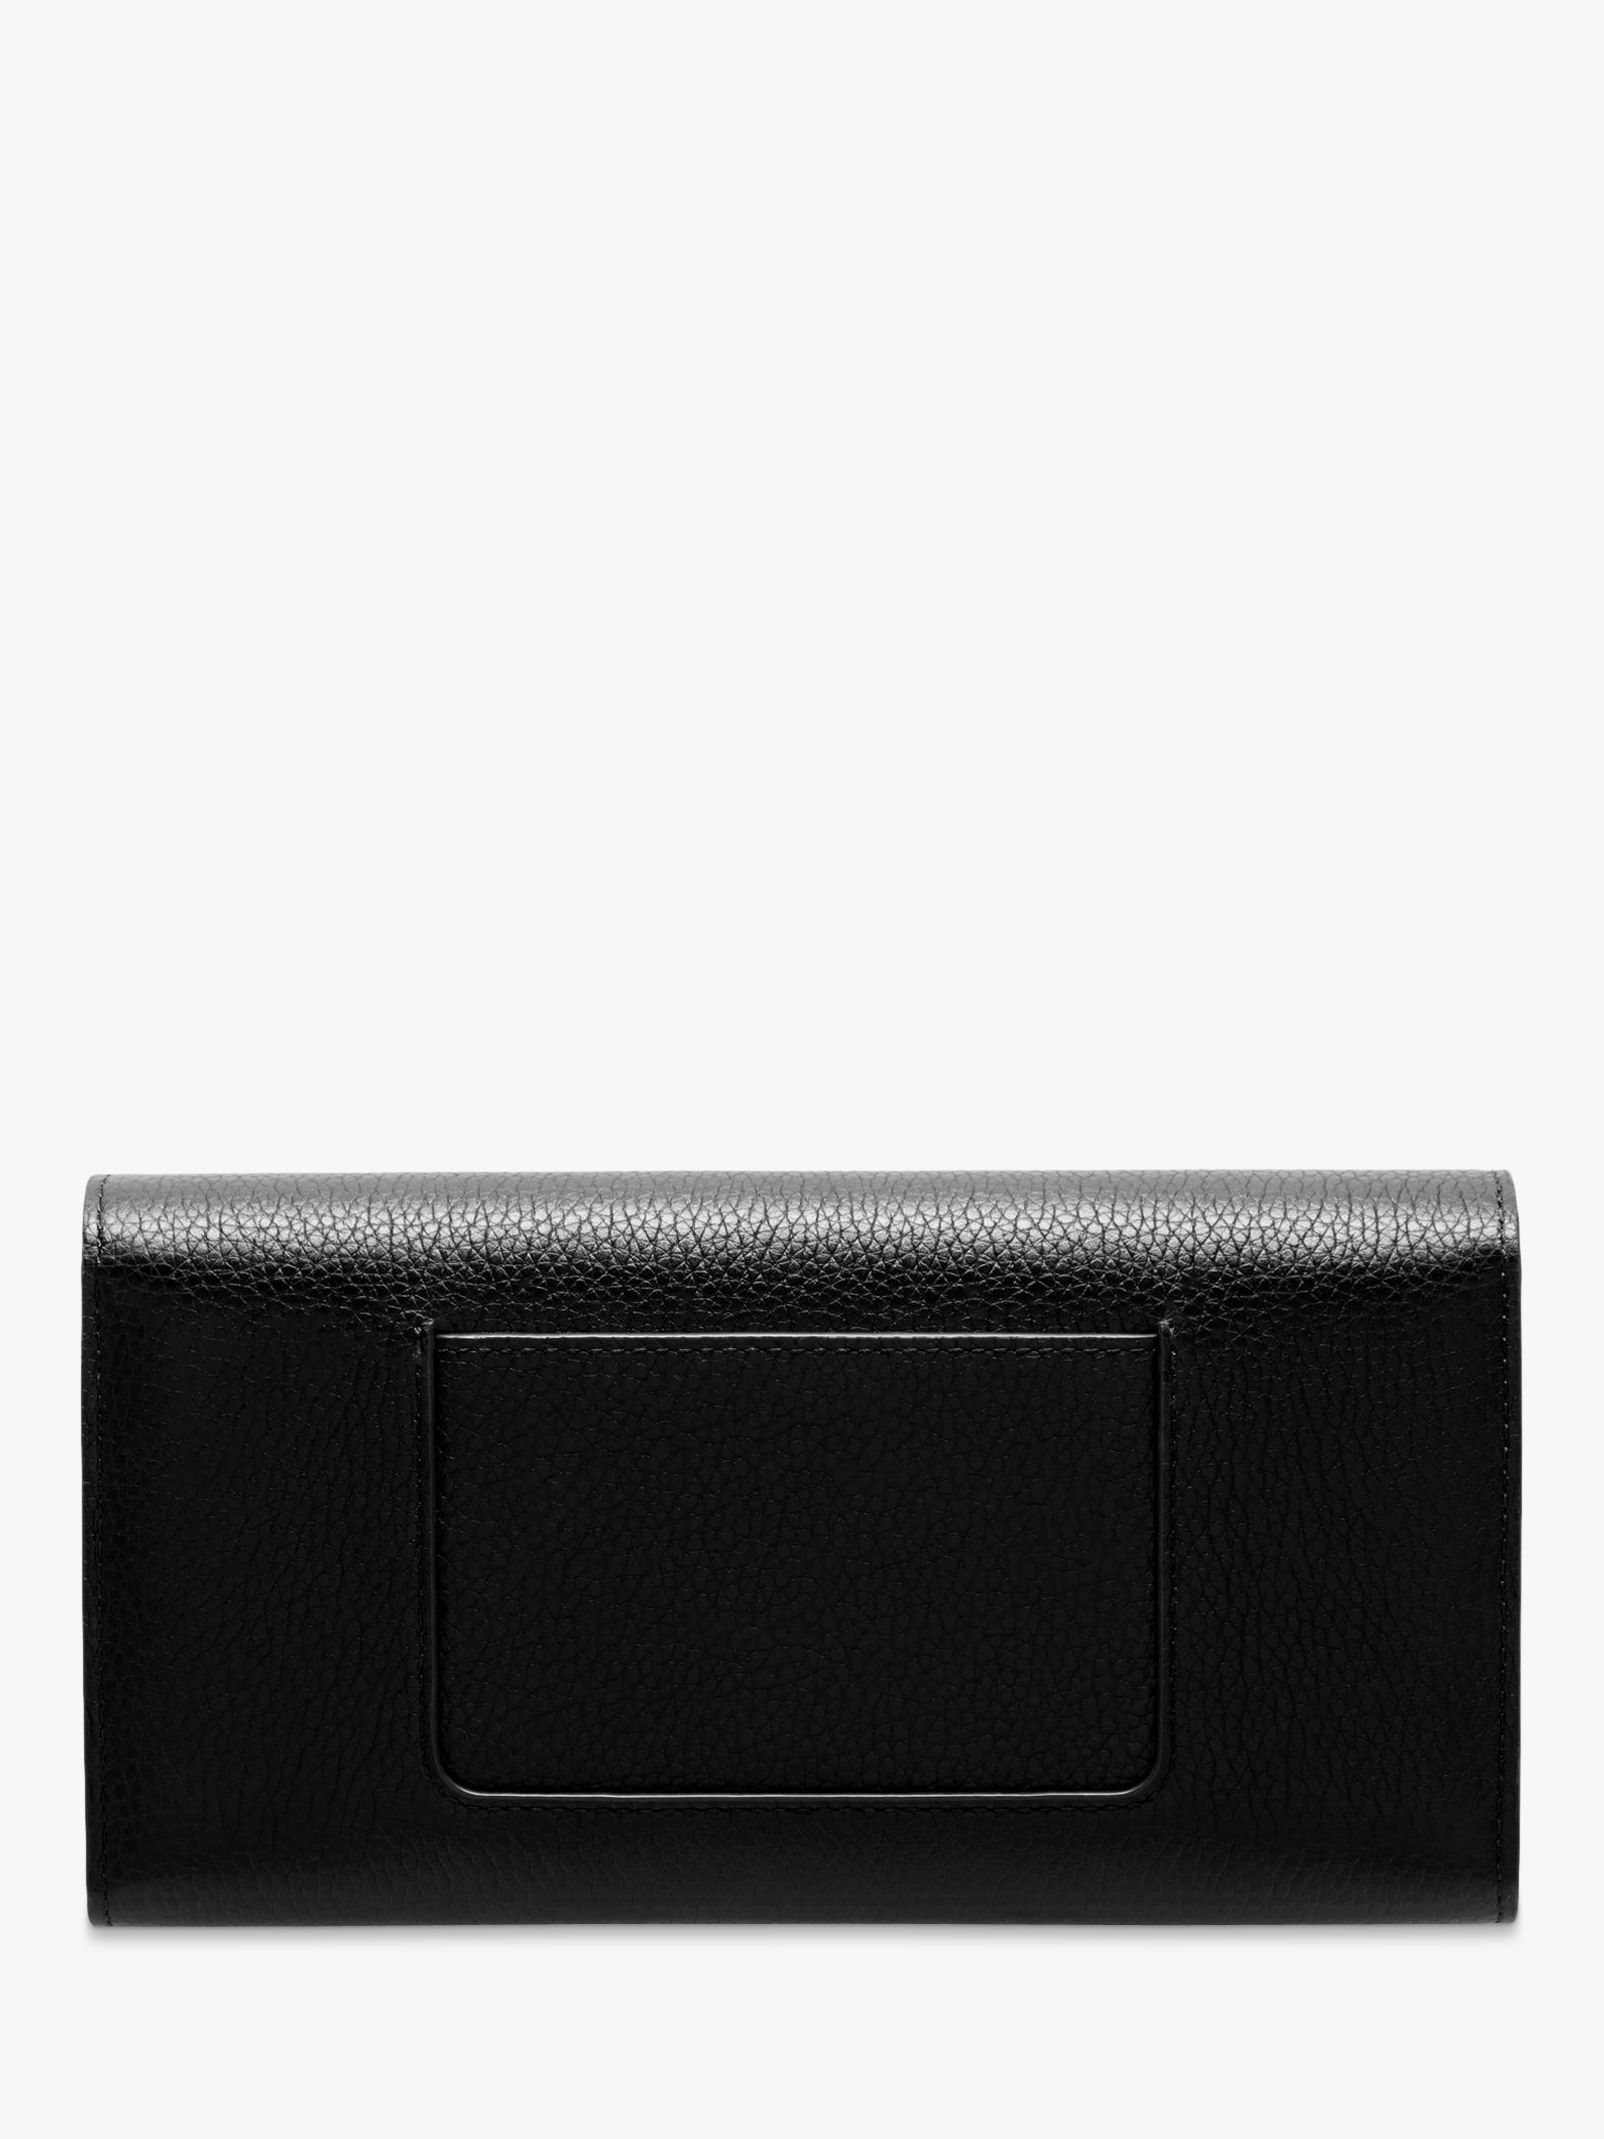 Mulberry Darley Small Classic Grain Leather Wallet, Black